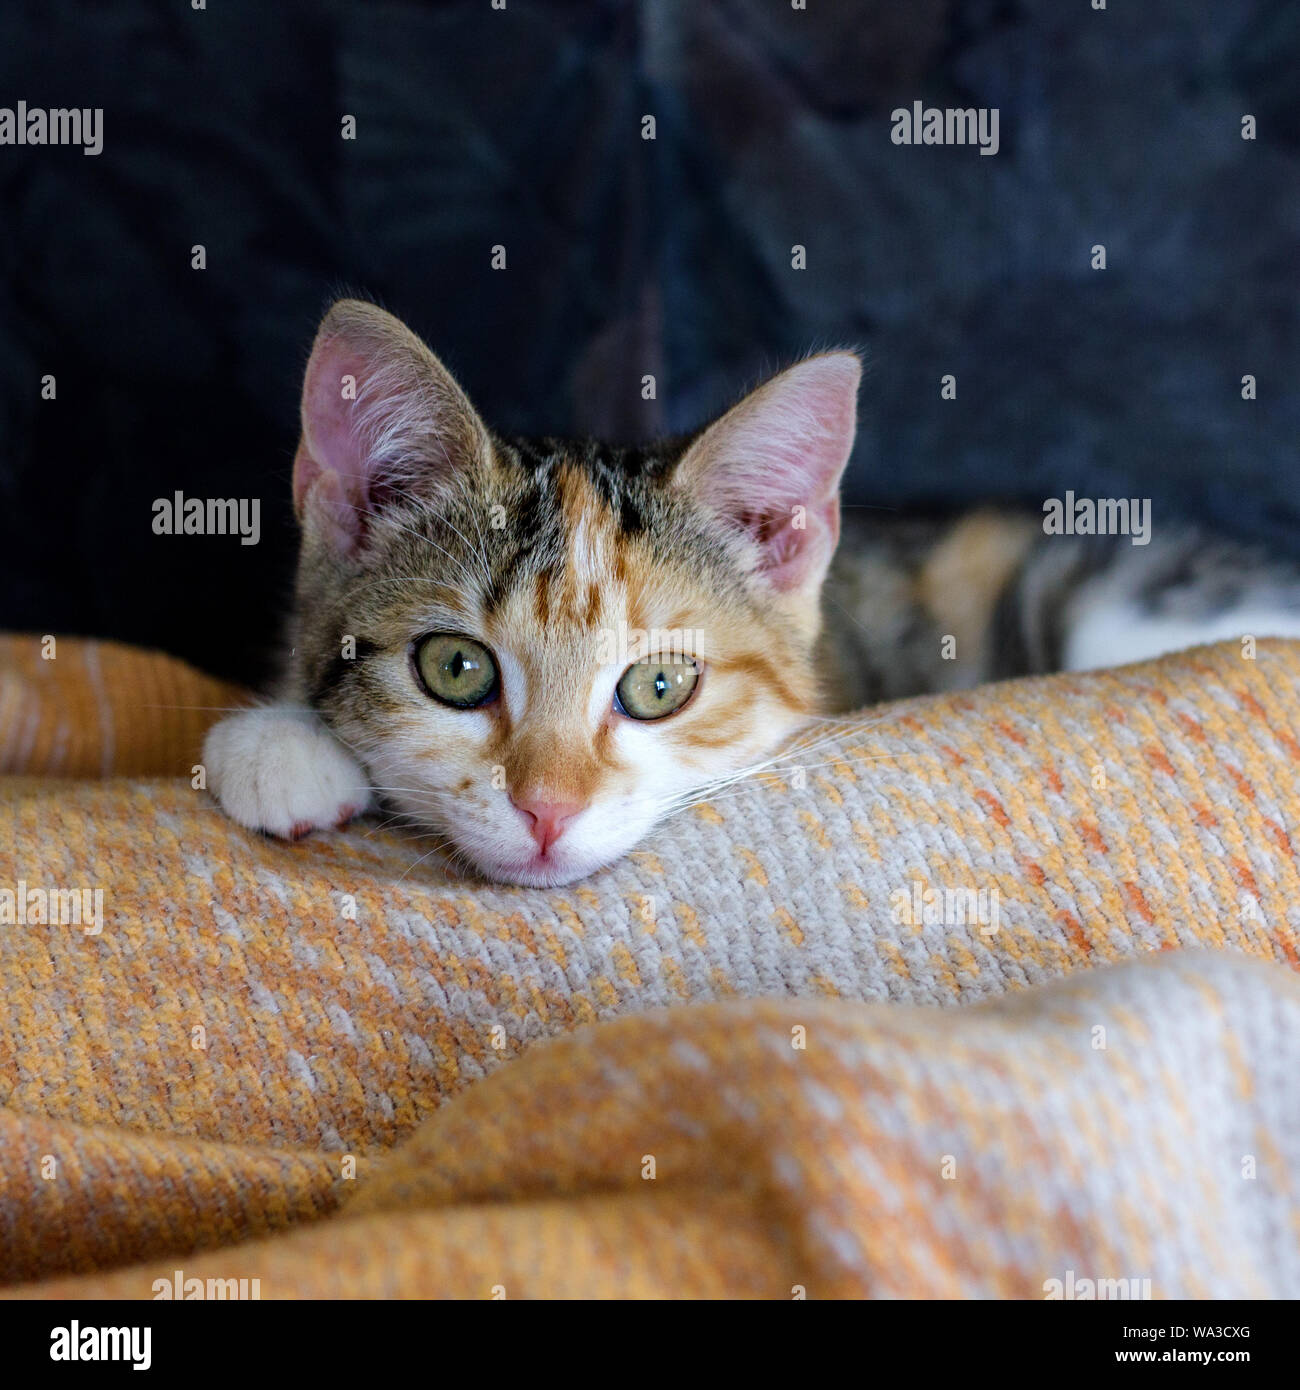 A young, cute, tabby cat lies on a woolen blanket Stock Photo